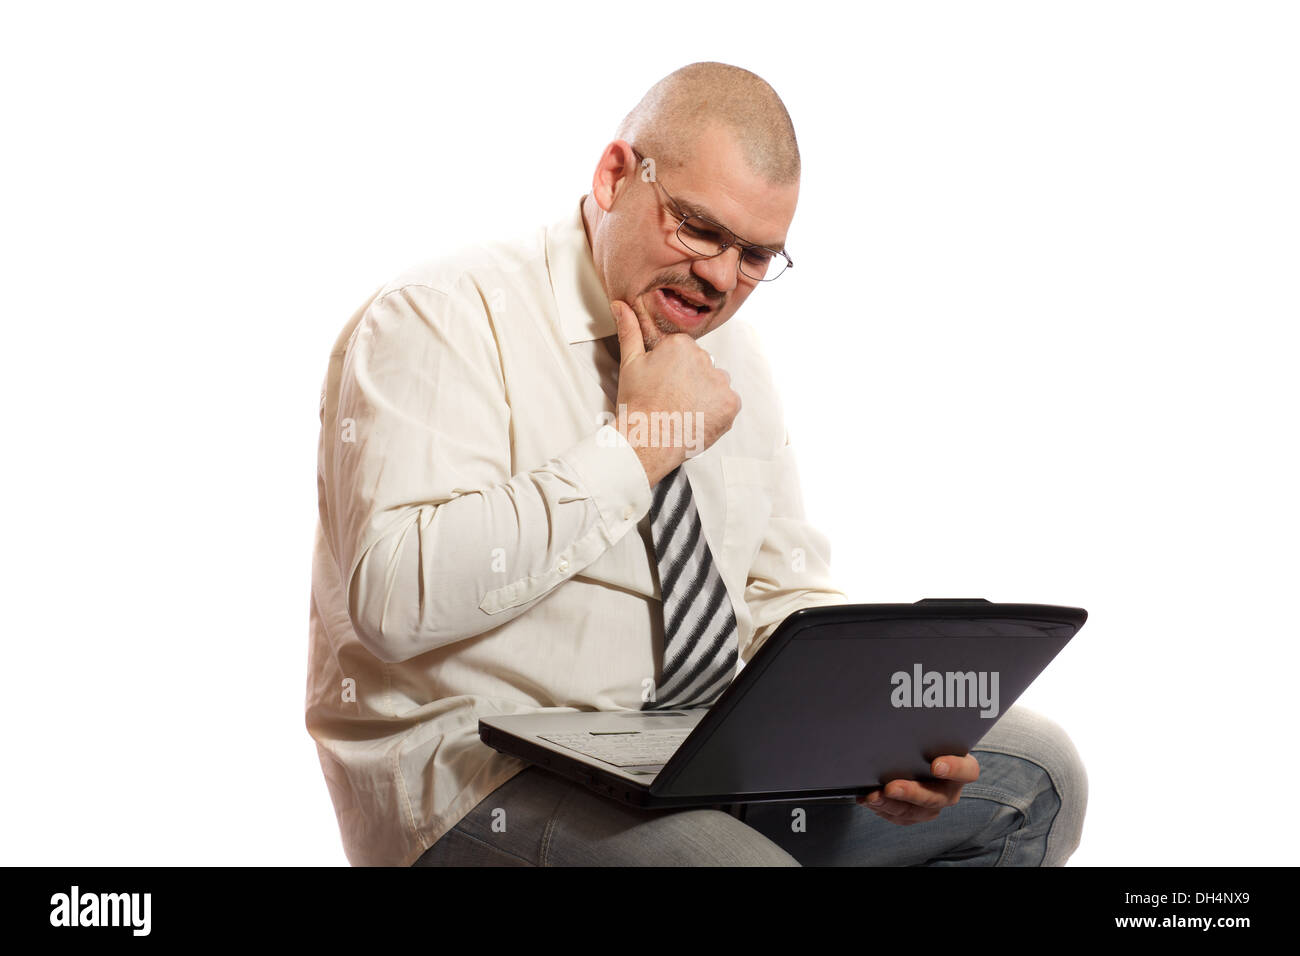 worried man looking at his computer on a white background Stock Photo